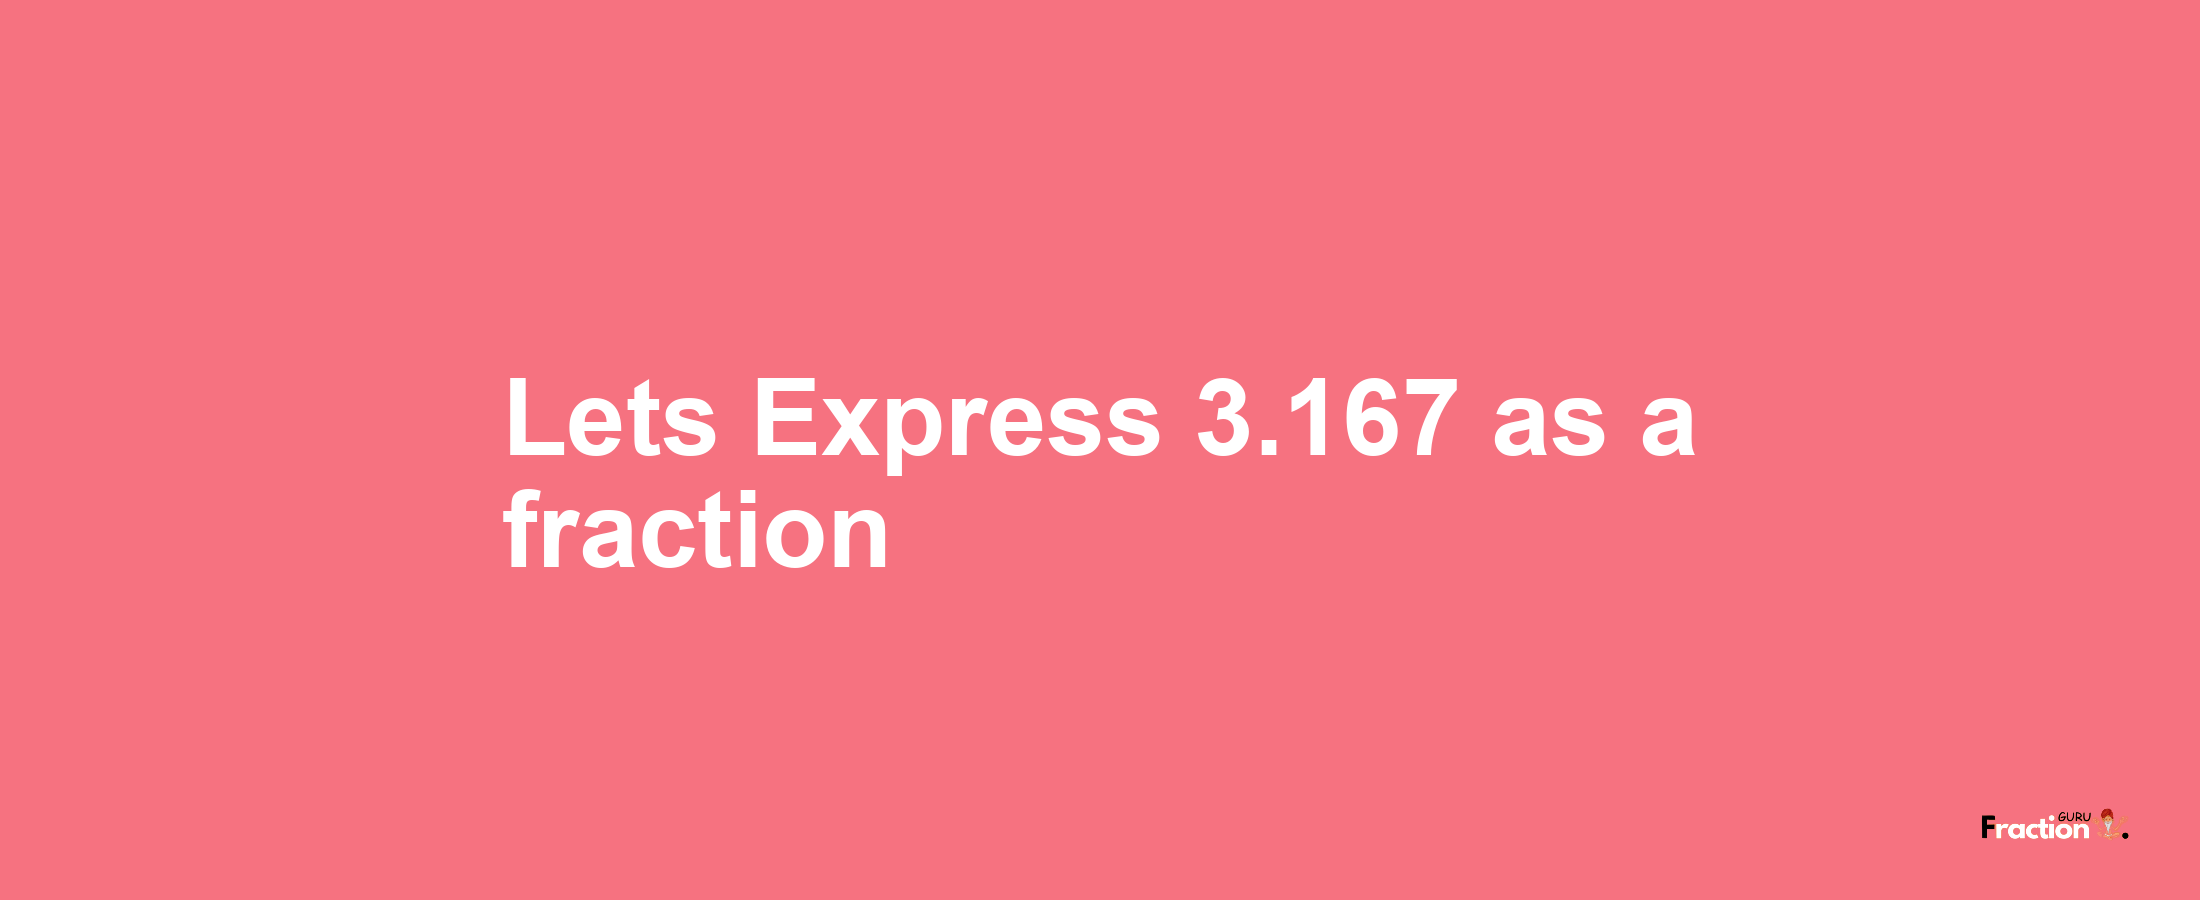 Lets Express 3.167 as afraction